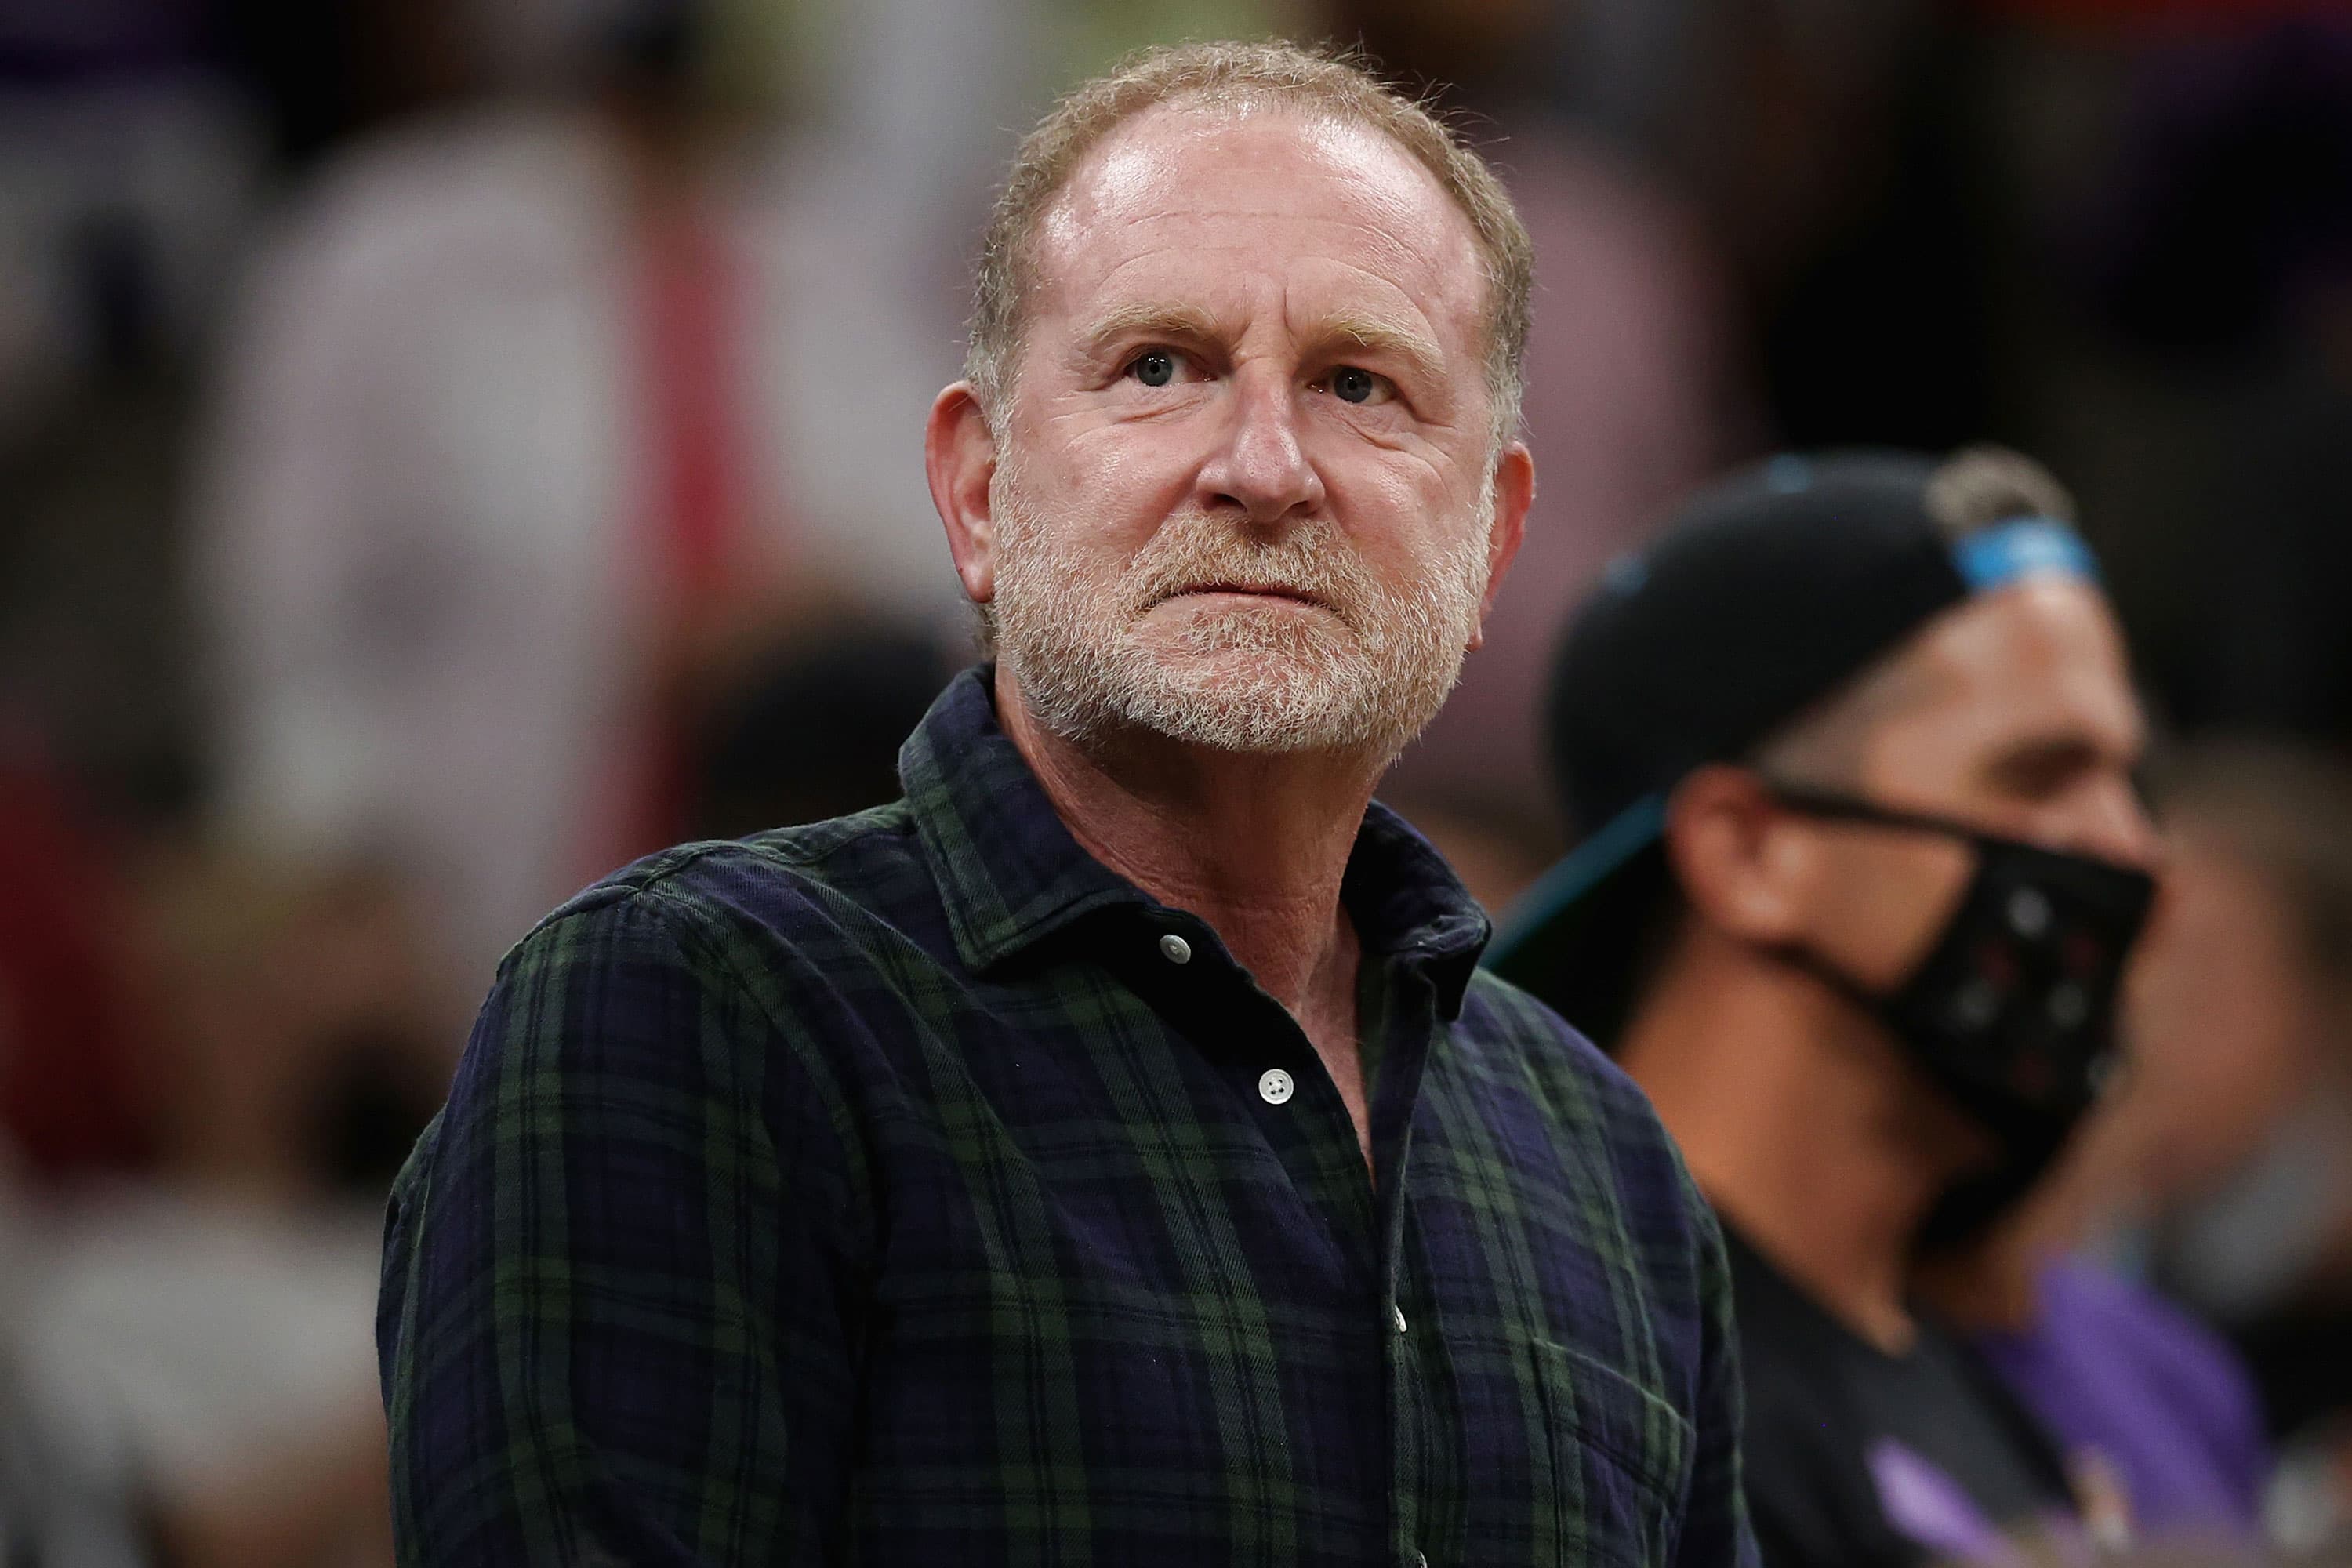 NBA launches investigation into Suns owner Robert Sarver over claims of racism misogyny in ESPN report – CNBC